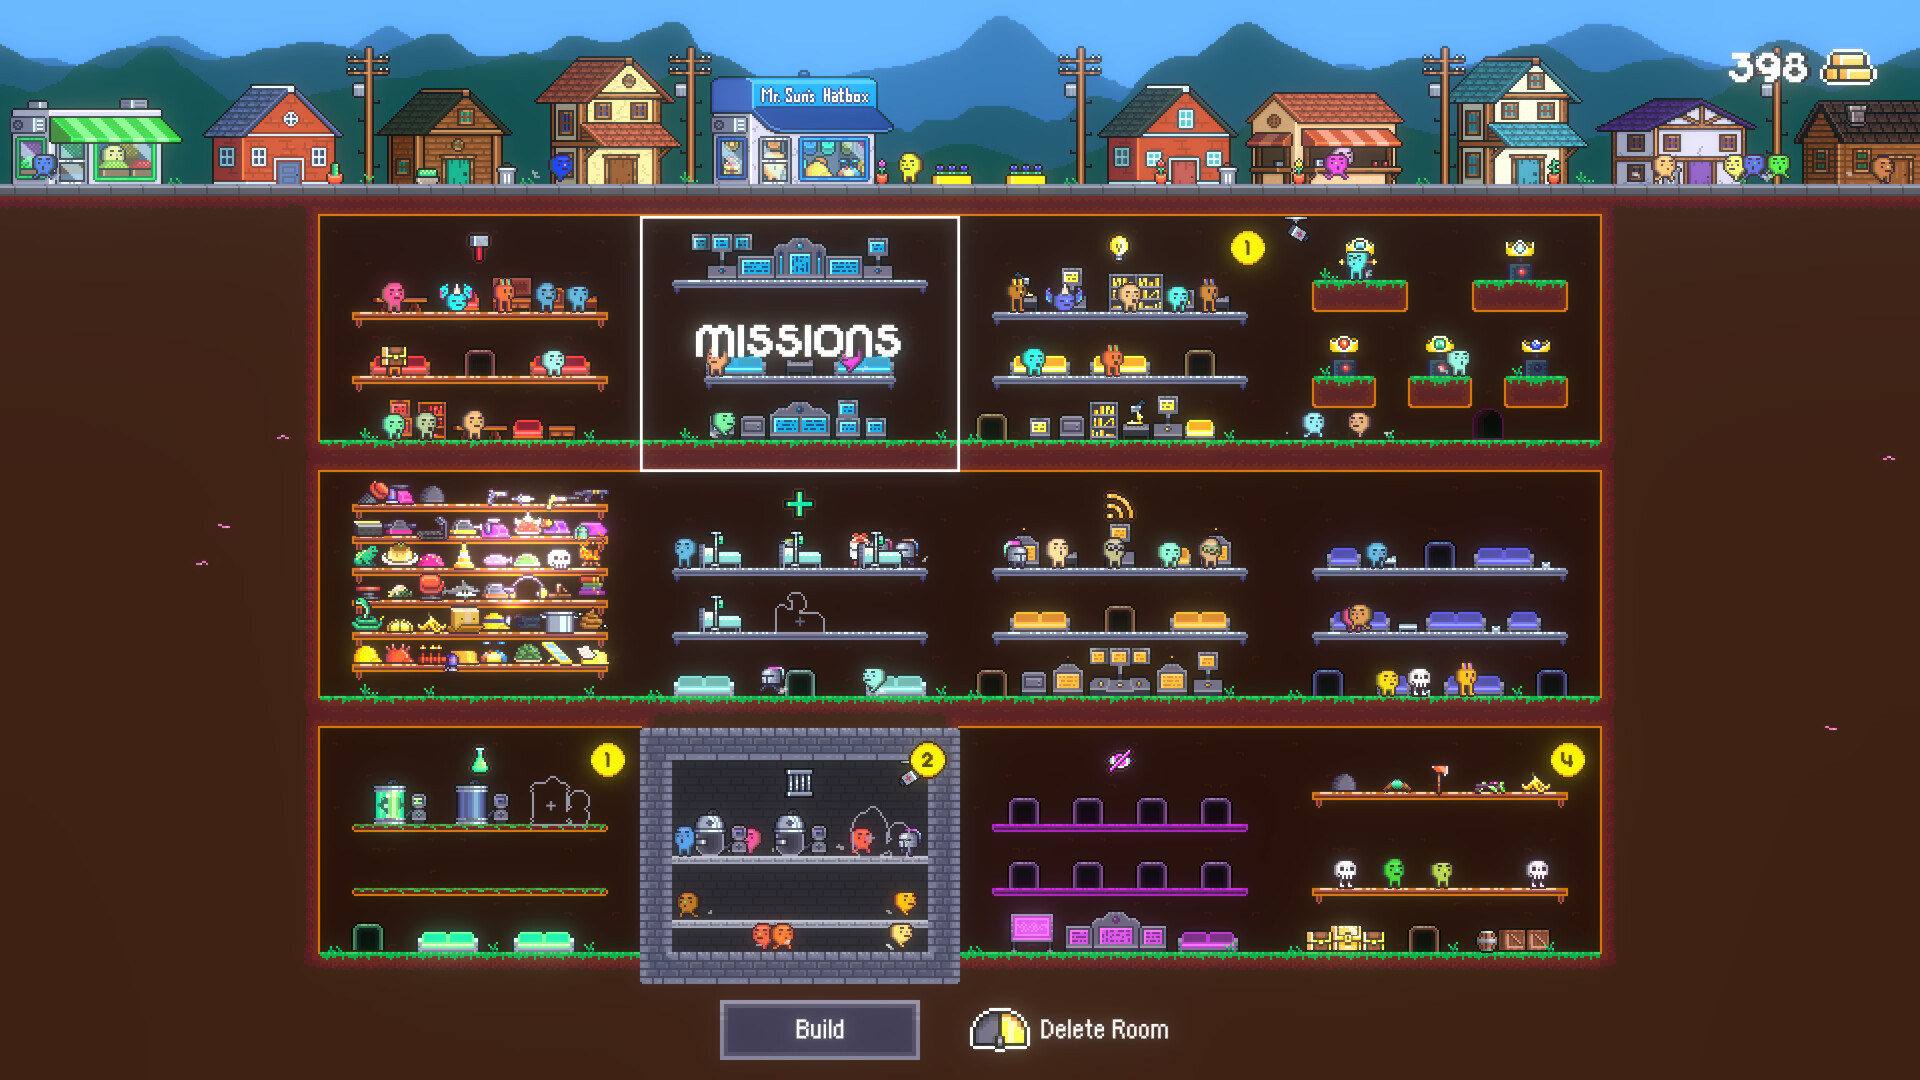 A screenshot of Mr. Sun’s Hatbox depicting a built-out version of the in-game base of operations for the delivery company “Amazin,” featuring rooms full of items and delivery personnel